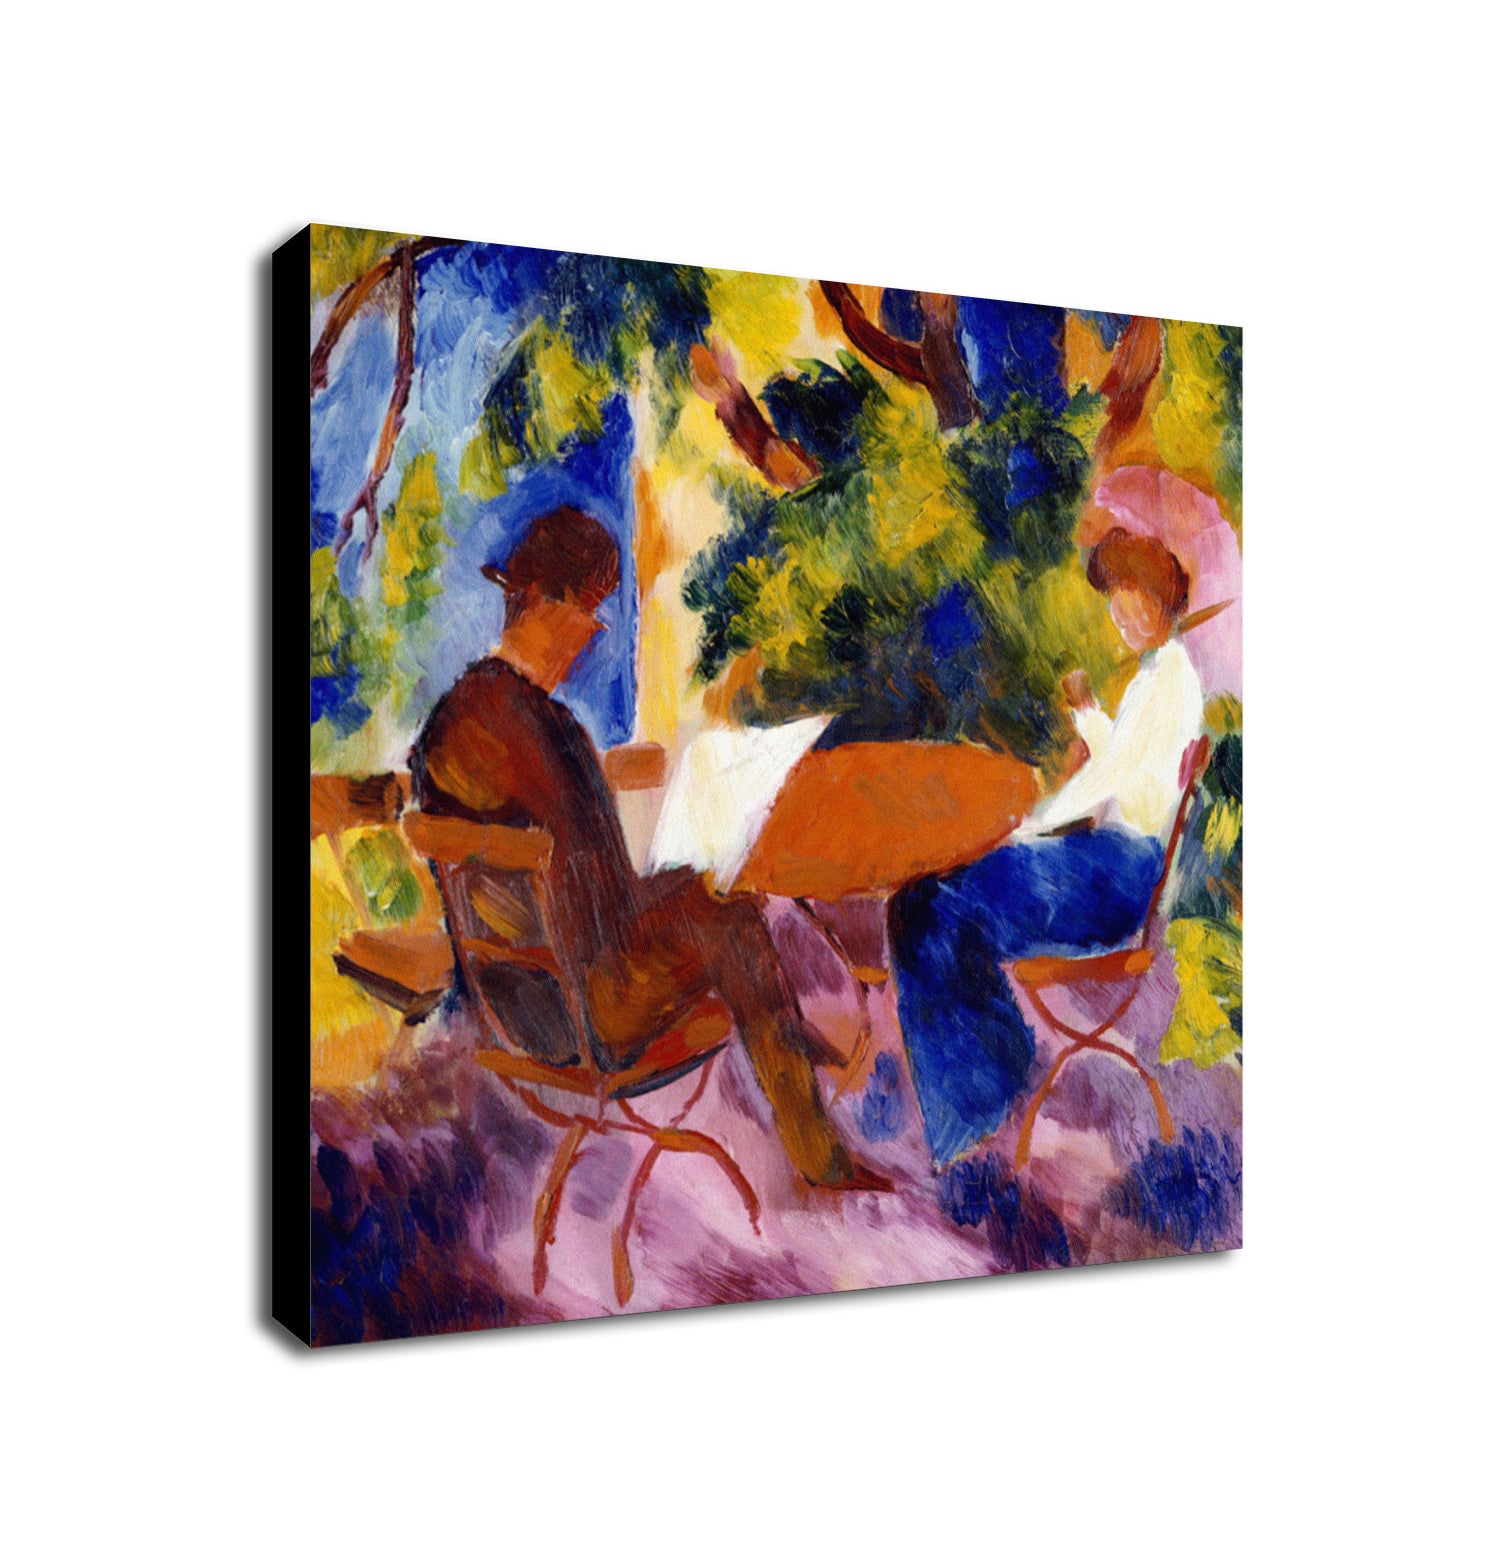 At The Table - Abstract Wall Art by August Macke - Framed Canvas Wall Art Print - Various Sizes